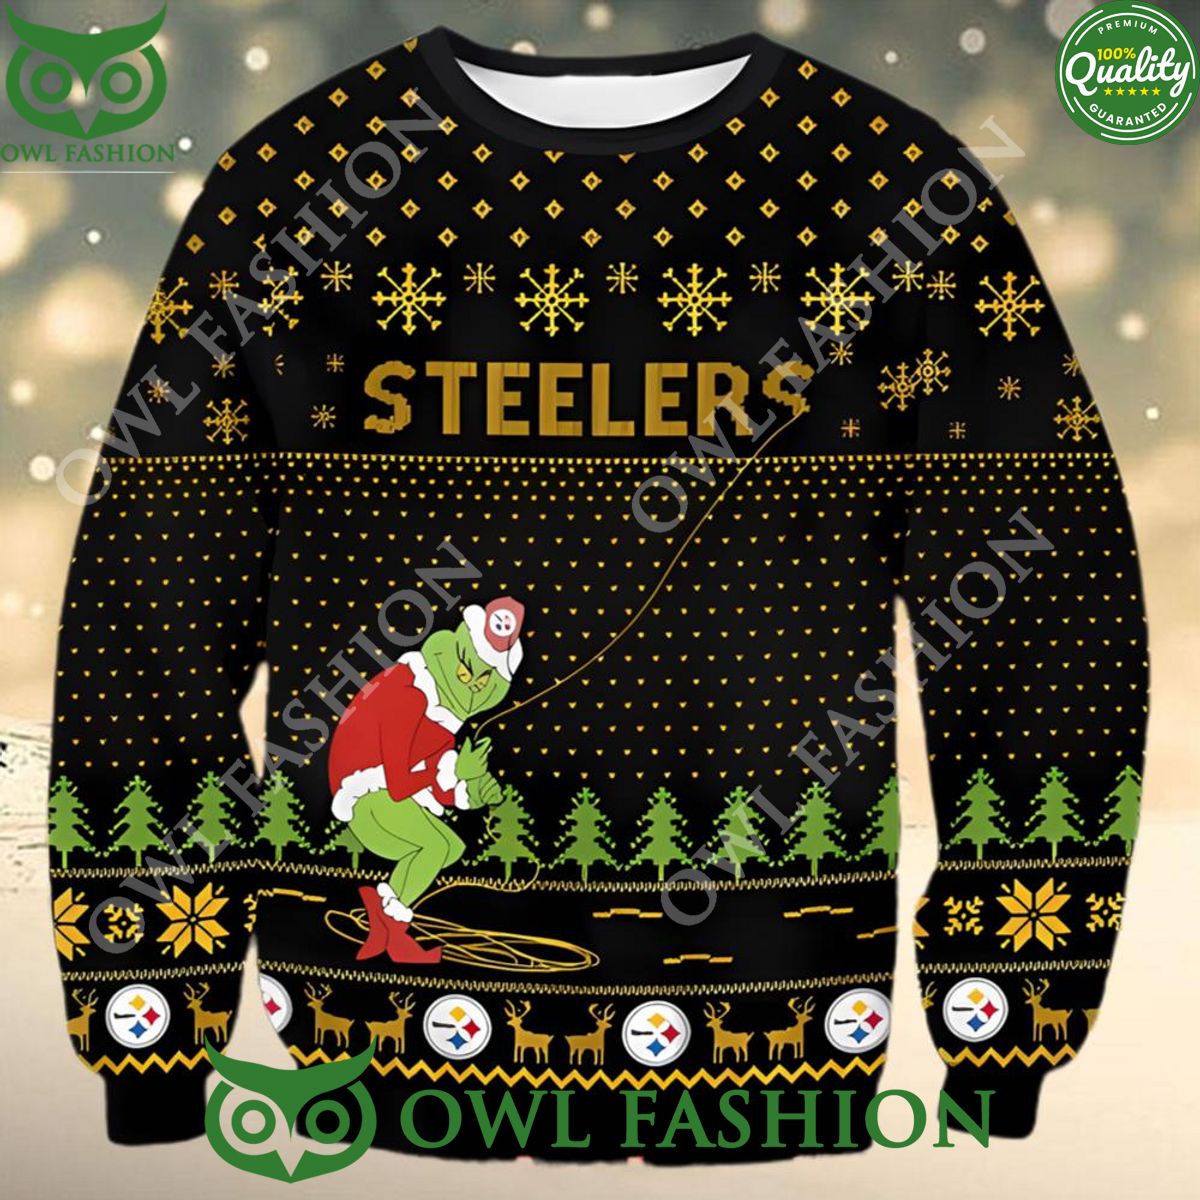 nfl pittsburgh steelers x the grinch snowflakes ugly christmas sweater jumper 1 ScCX4.jpg